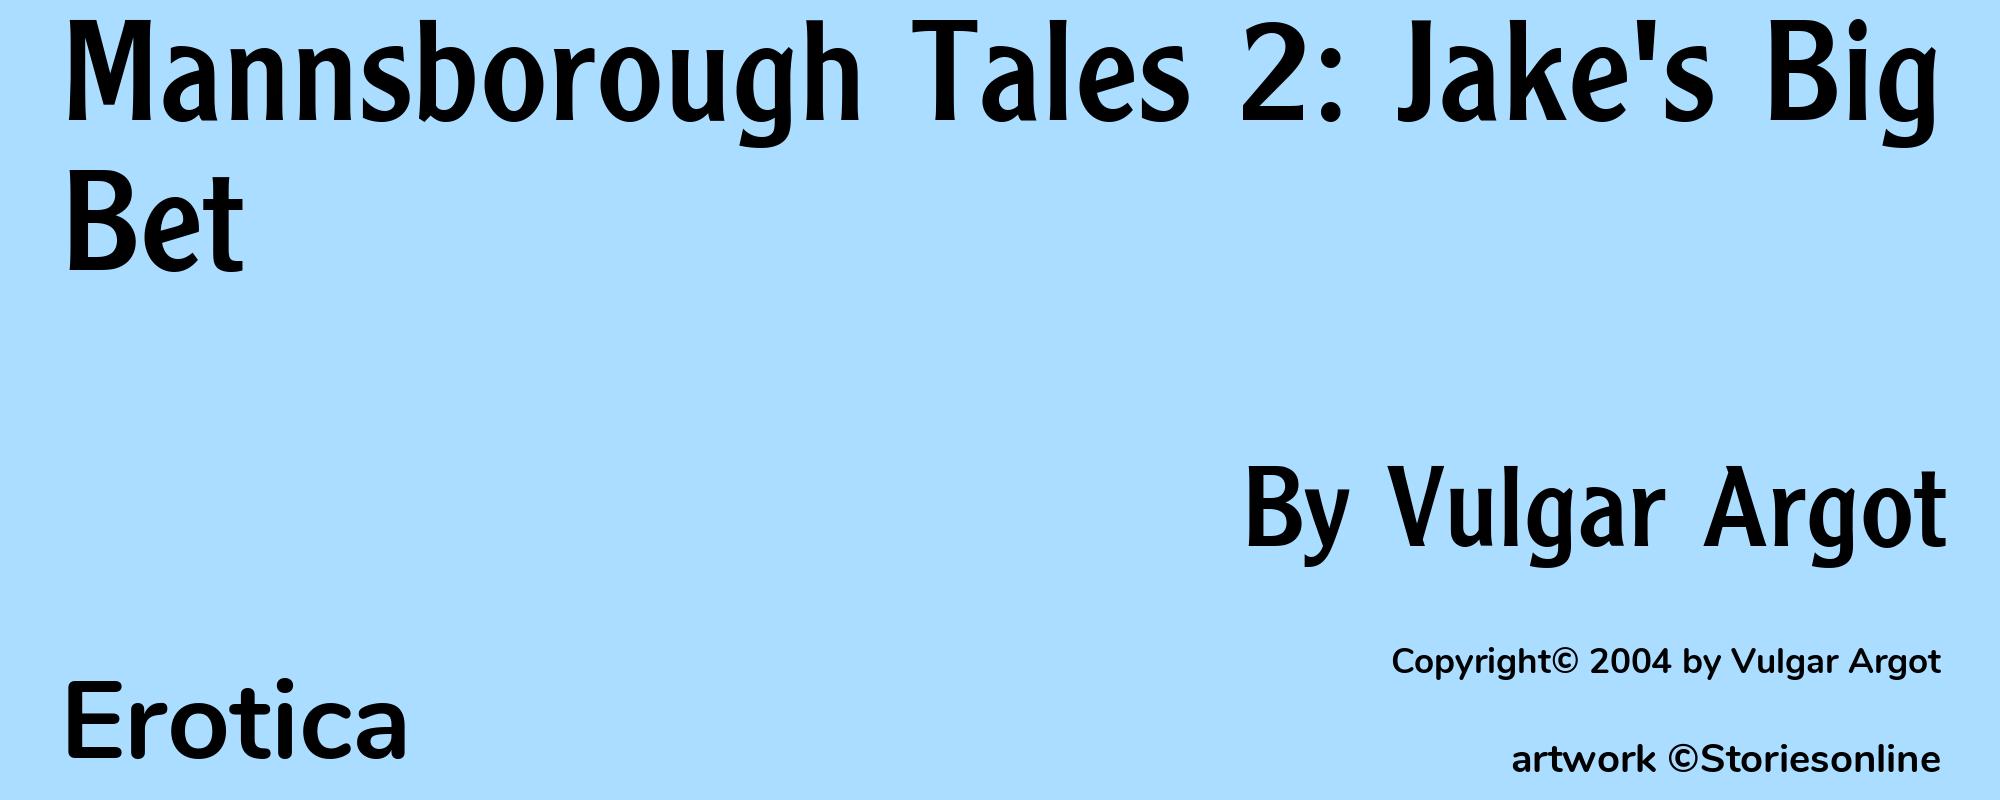 Mannsborough Tales 2: Jake's Big Bet - Cover